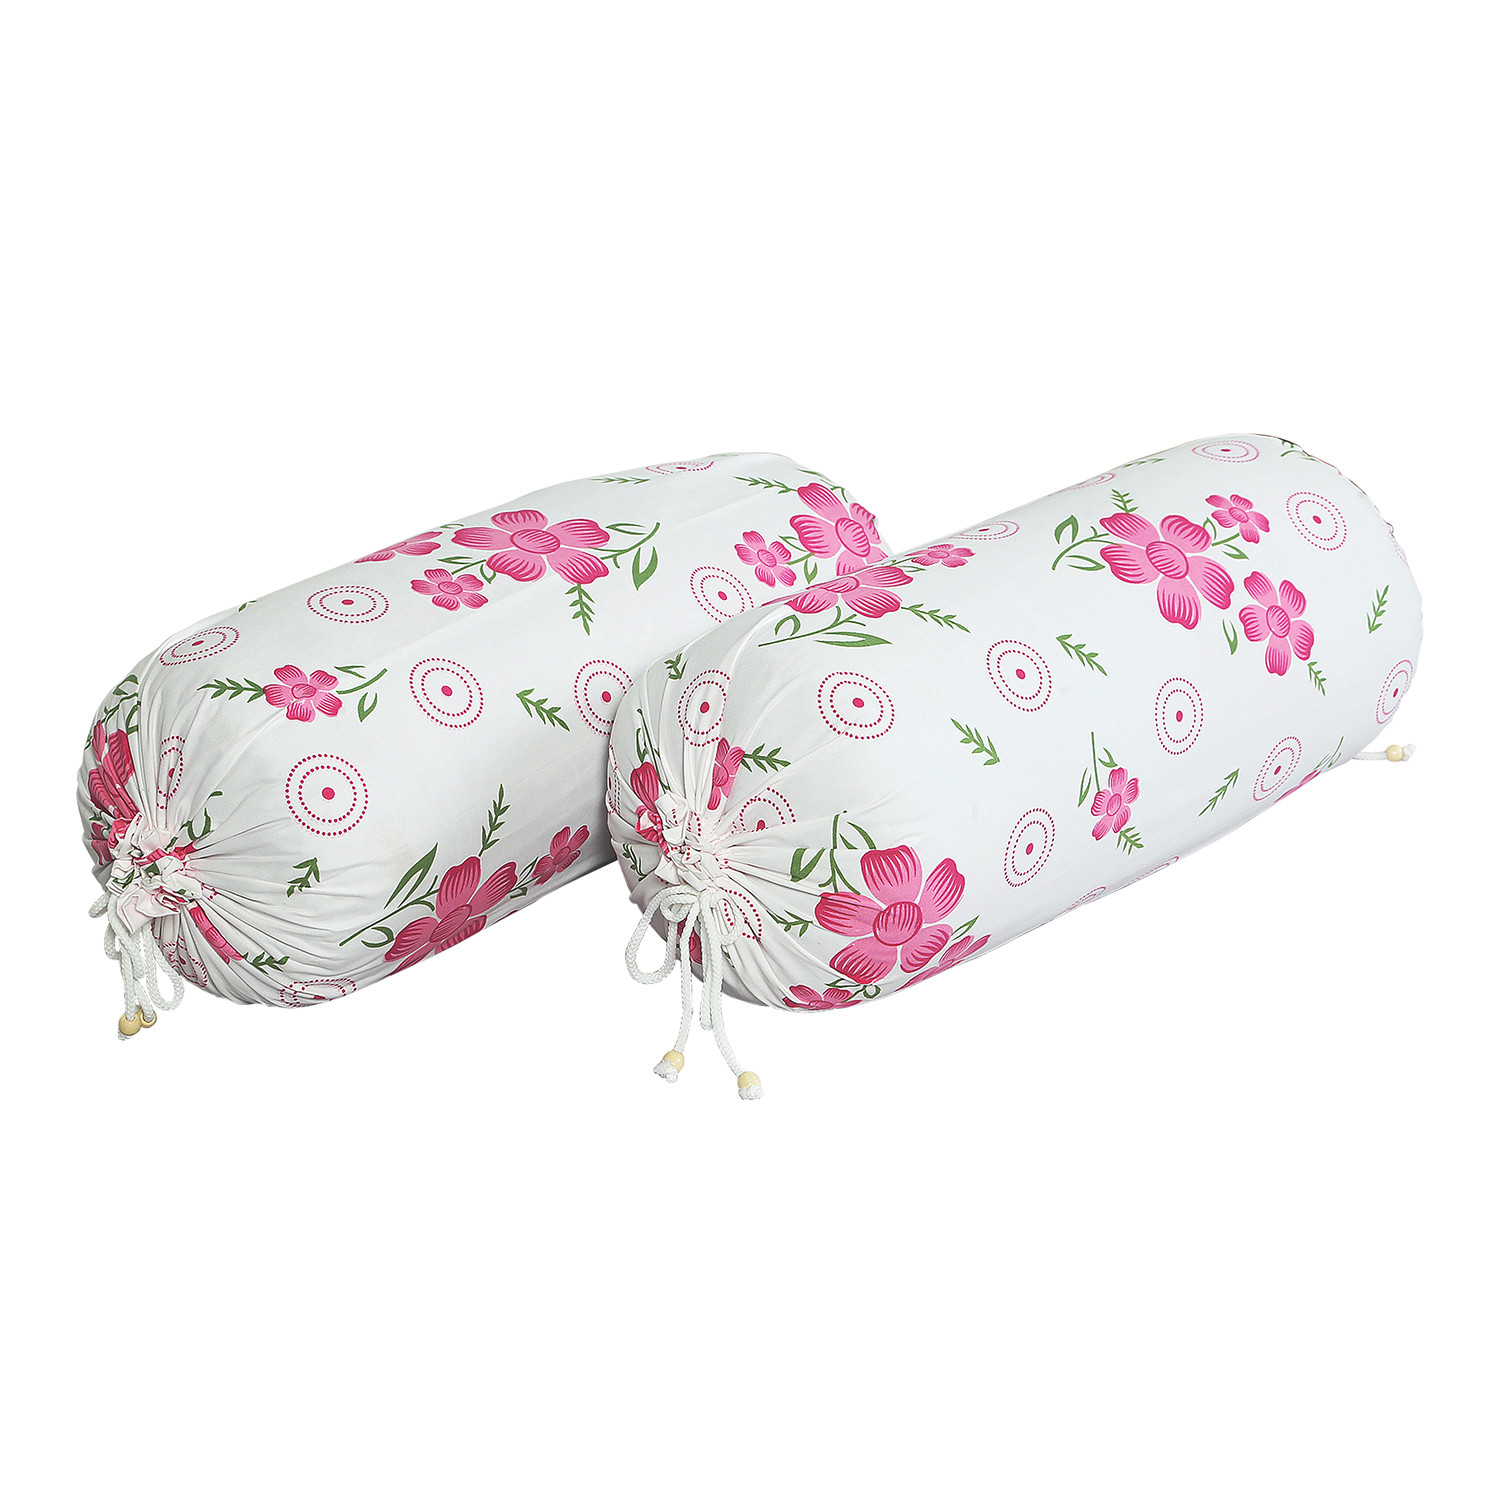 Kuber Industries Bolster Covers | Soft Cotton Bolster Cover Set | Bolster Pillow Covers | Pink Circle Flower Roll Masand Cover | Long Pillow Case | 16x32 Inch|White